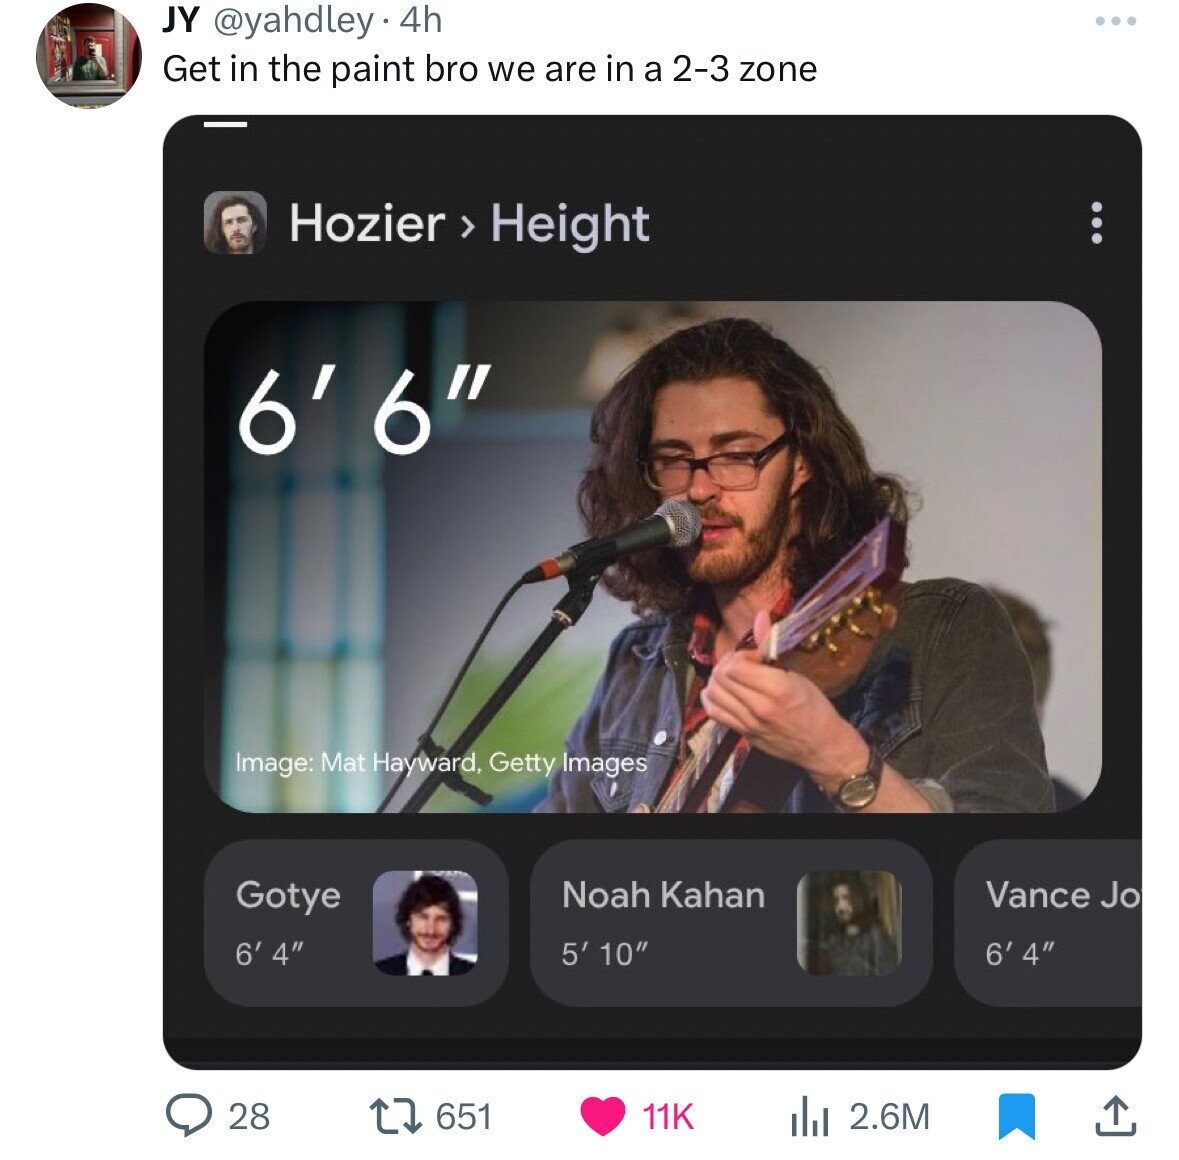 screenshot - Jy 4h . Get in the paint bro we are in a 23 zone Hozier > Height 6'6" Image Mat Hayward, Getty Images Noah Kahan Vance Jo 6'4" Gotye 6'4" 5' 10" 28 Ilil 2.6M